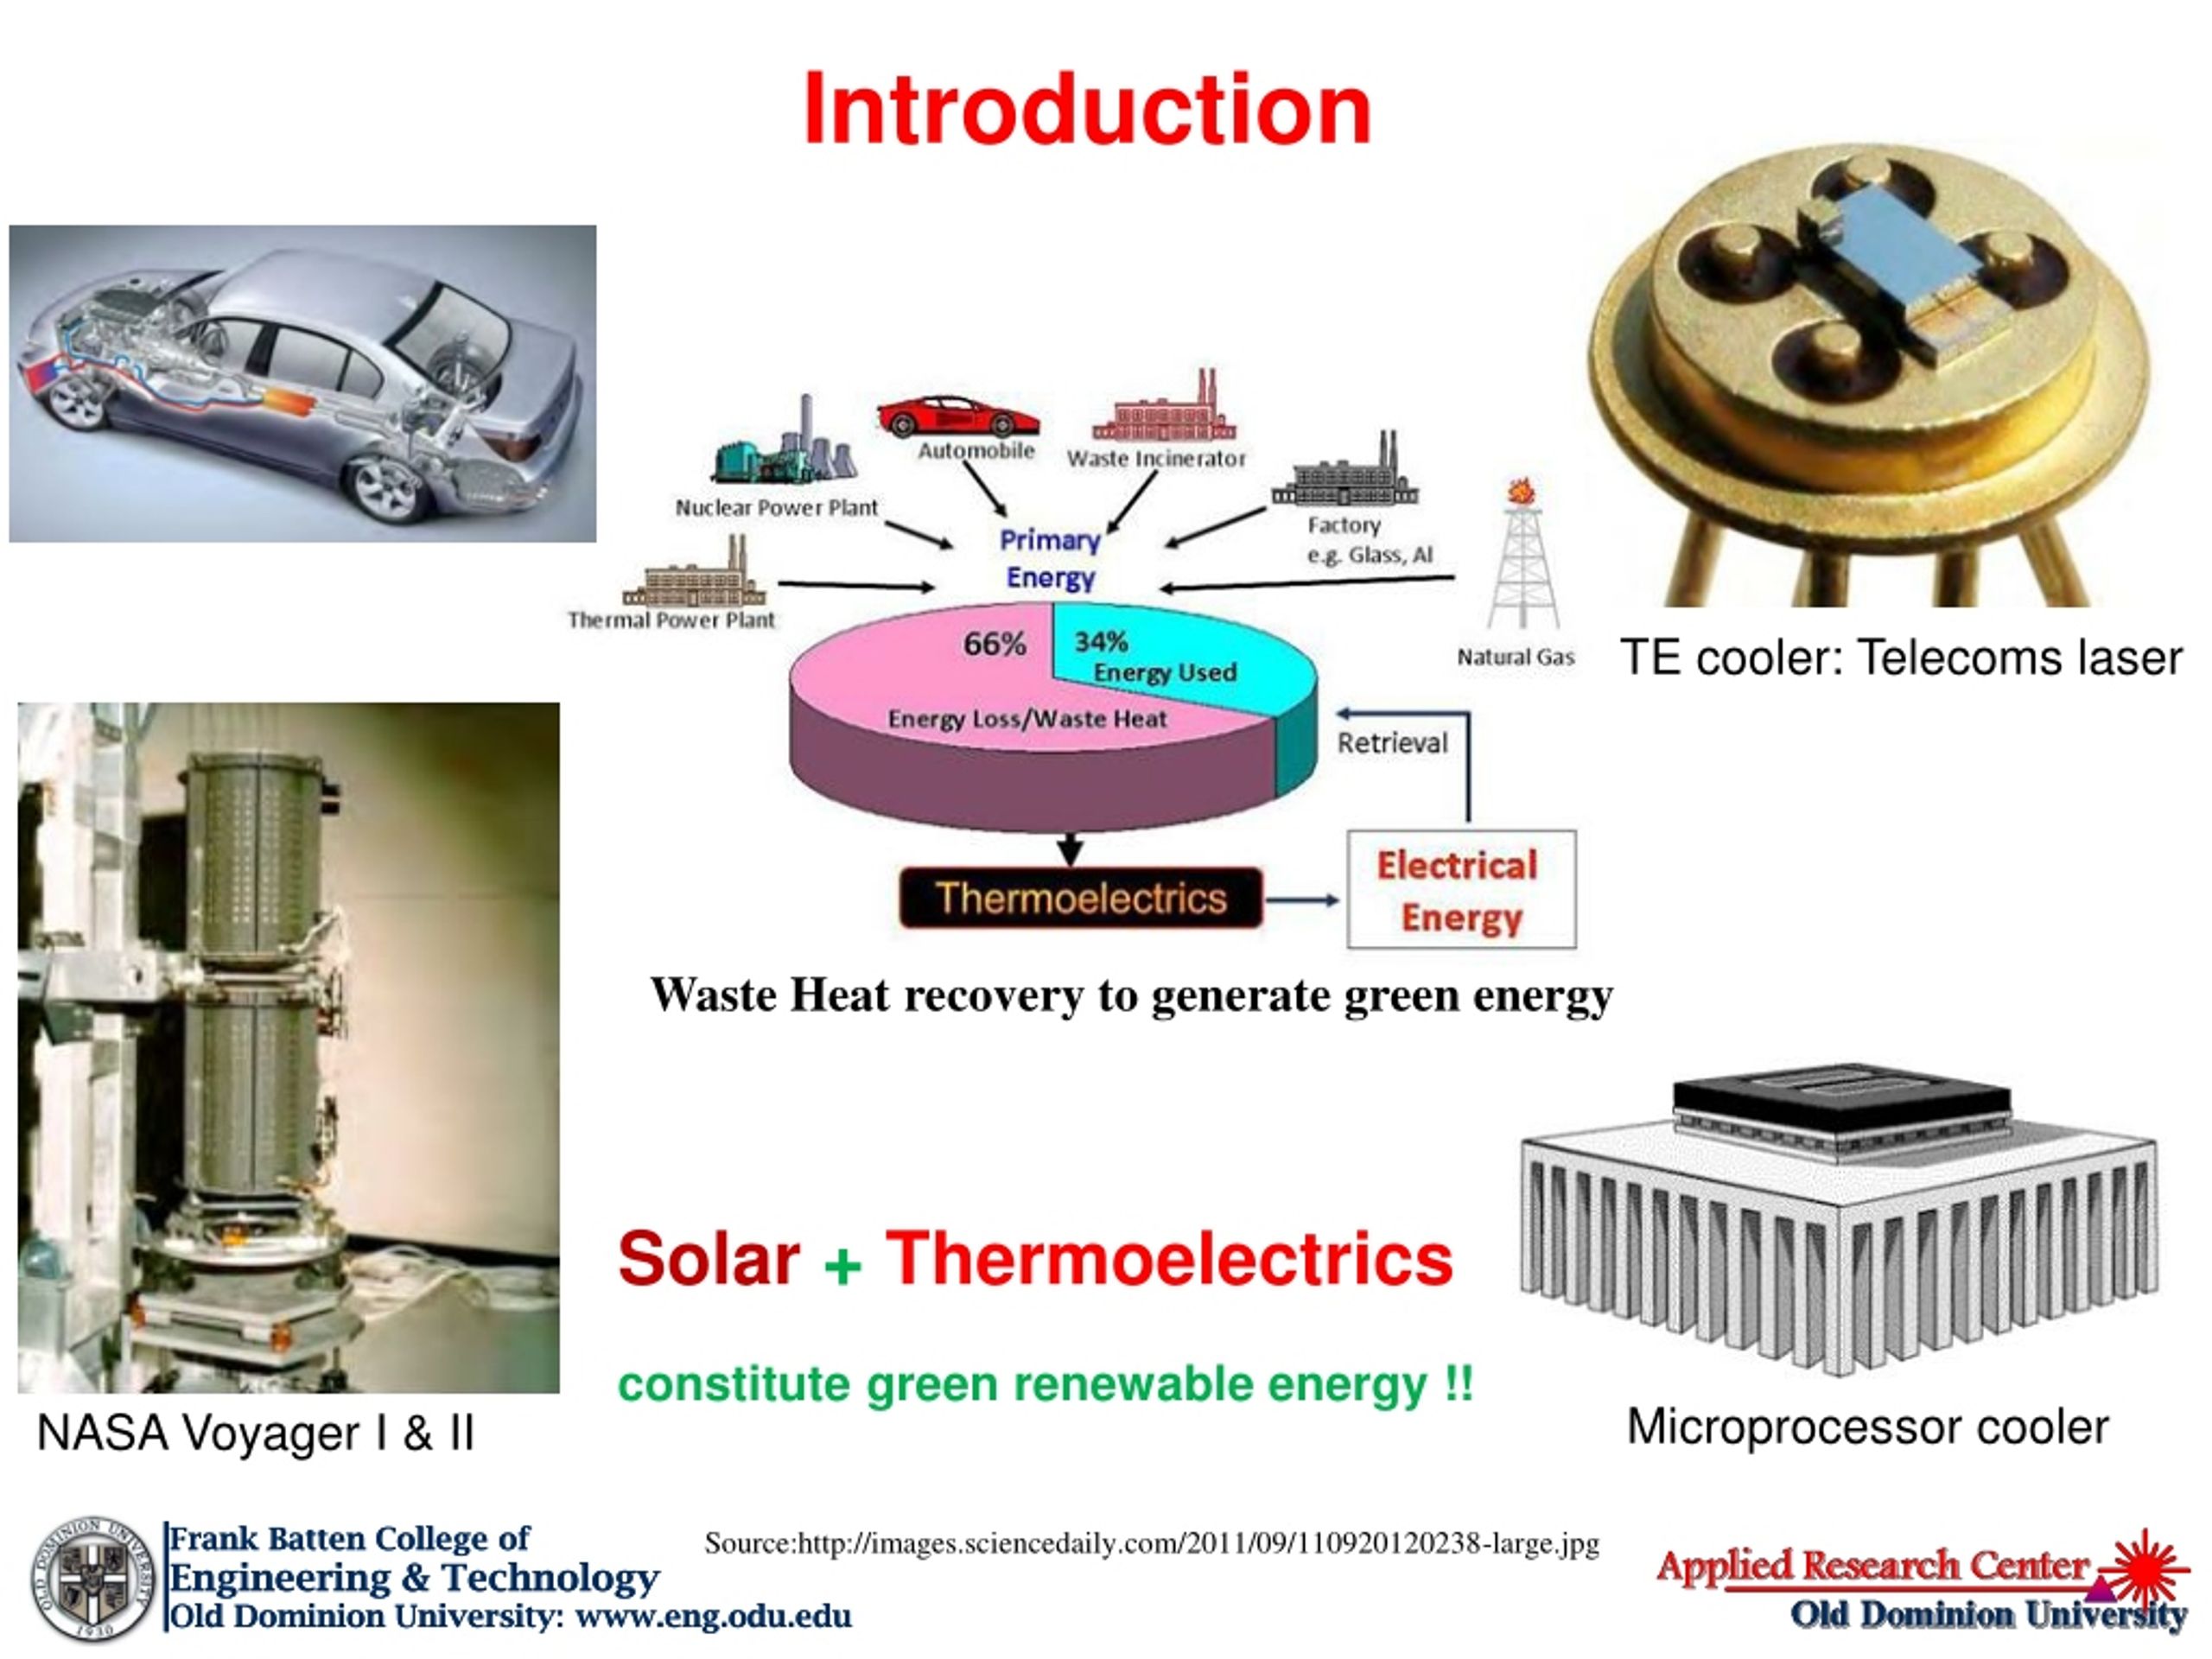 powerpoint presentation on thermoelectric materials